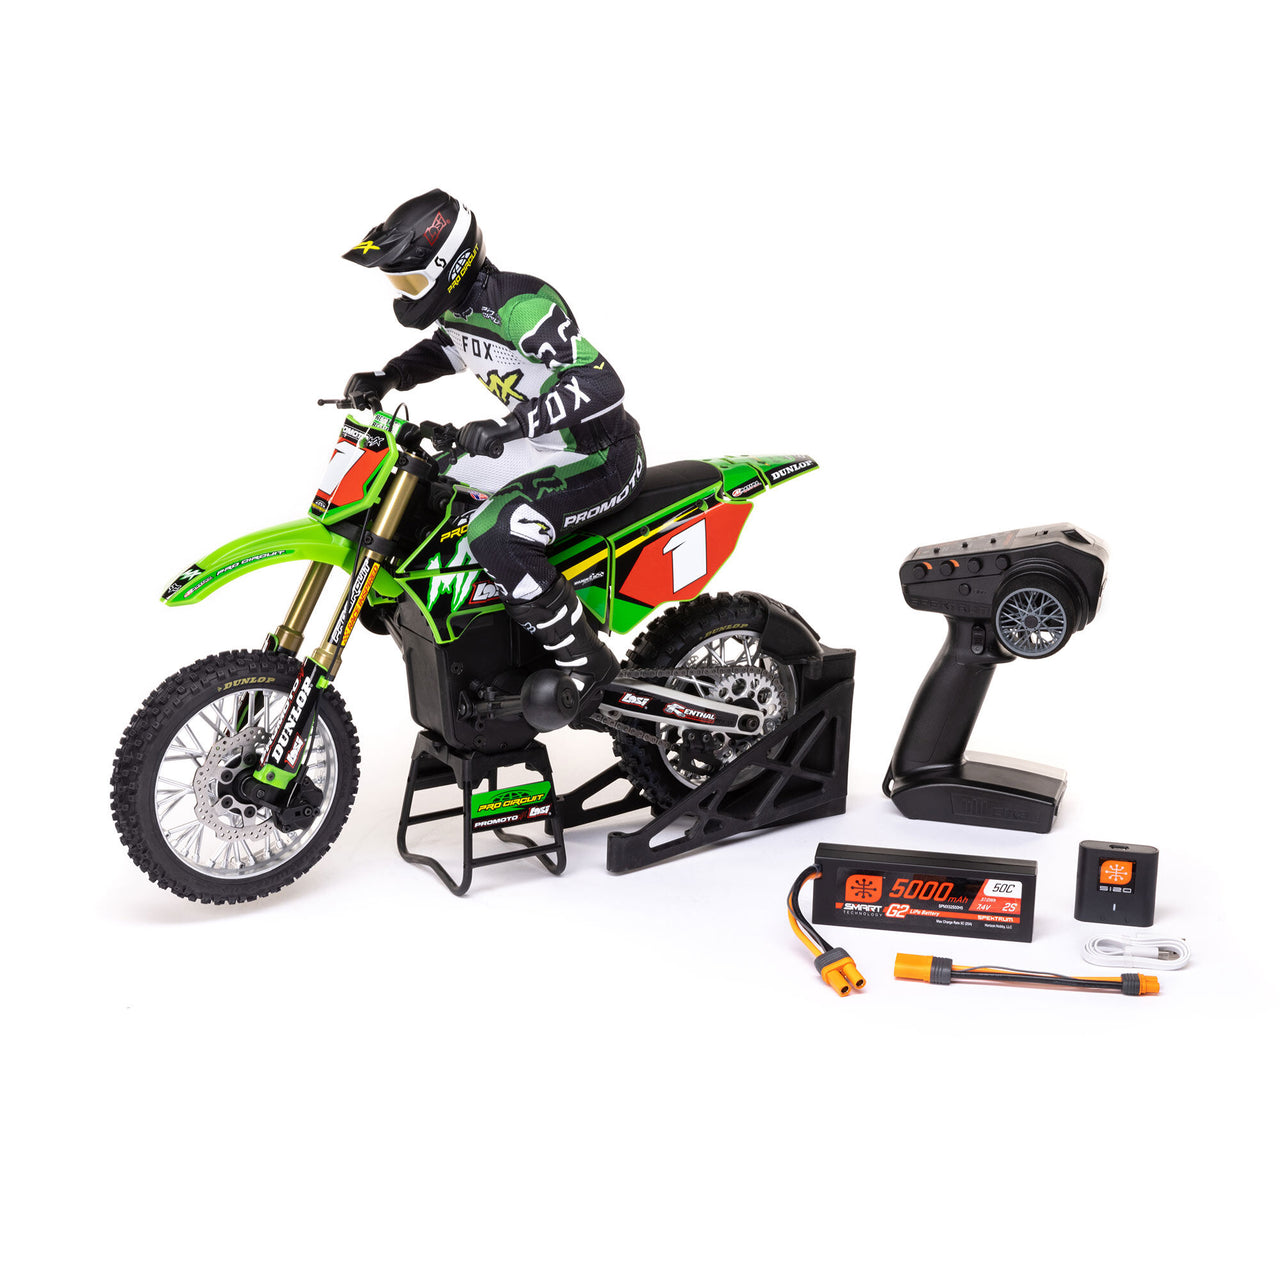 LOS06002 1/4 Promoto-MX Motorcycle RTR with Battery and Charger, Pro Circuit